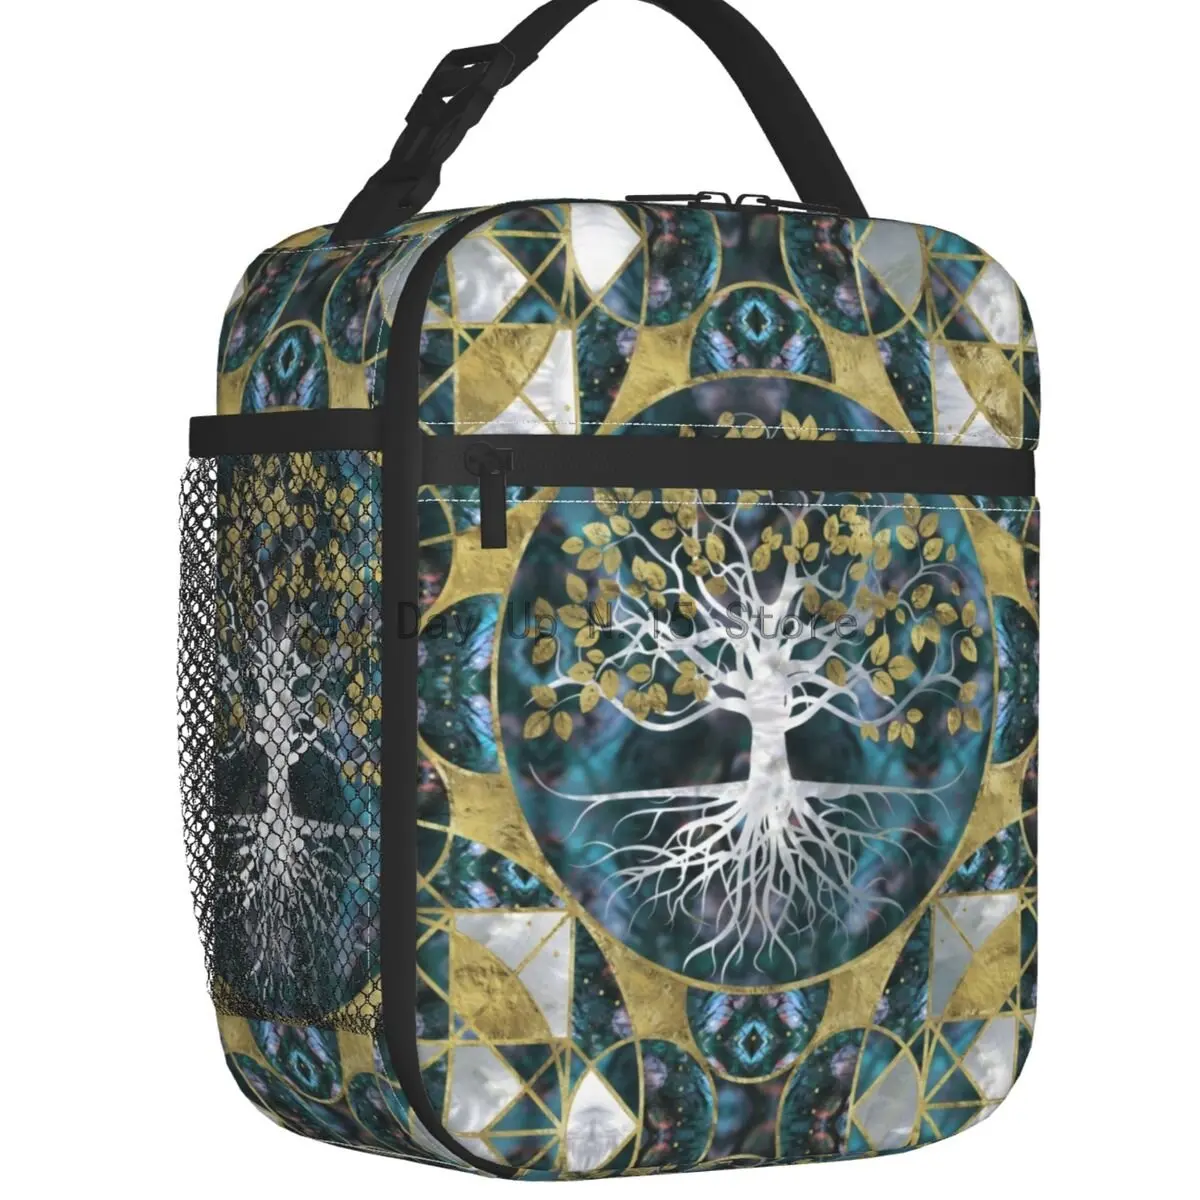 

Tree Of Life Marble And Gold Insulated Lunch Bag Women Portable Vikings Yggdrasil Thermal Cooler Bento Box Beach Camping Travel